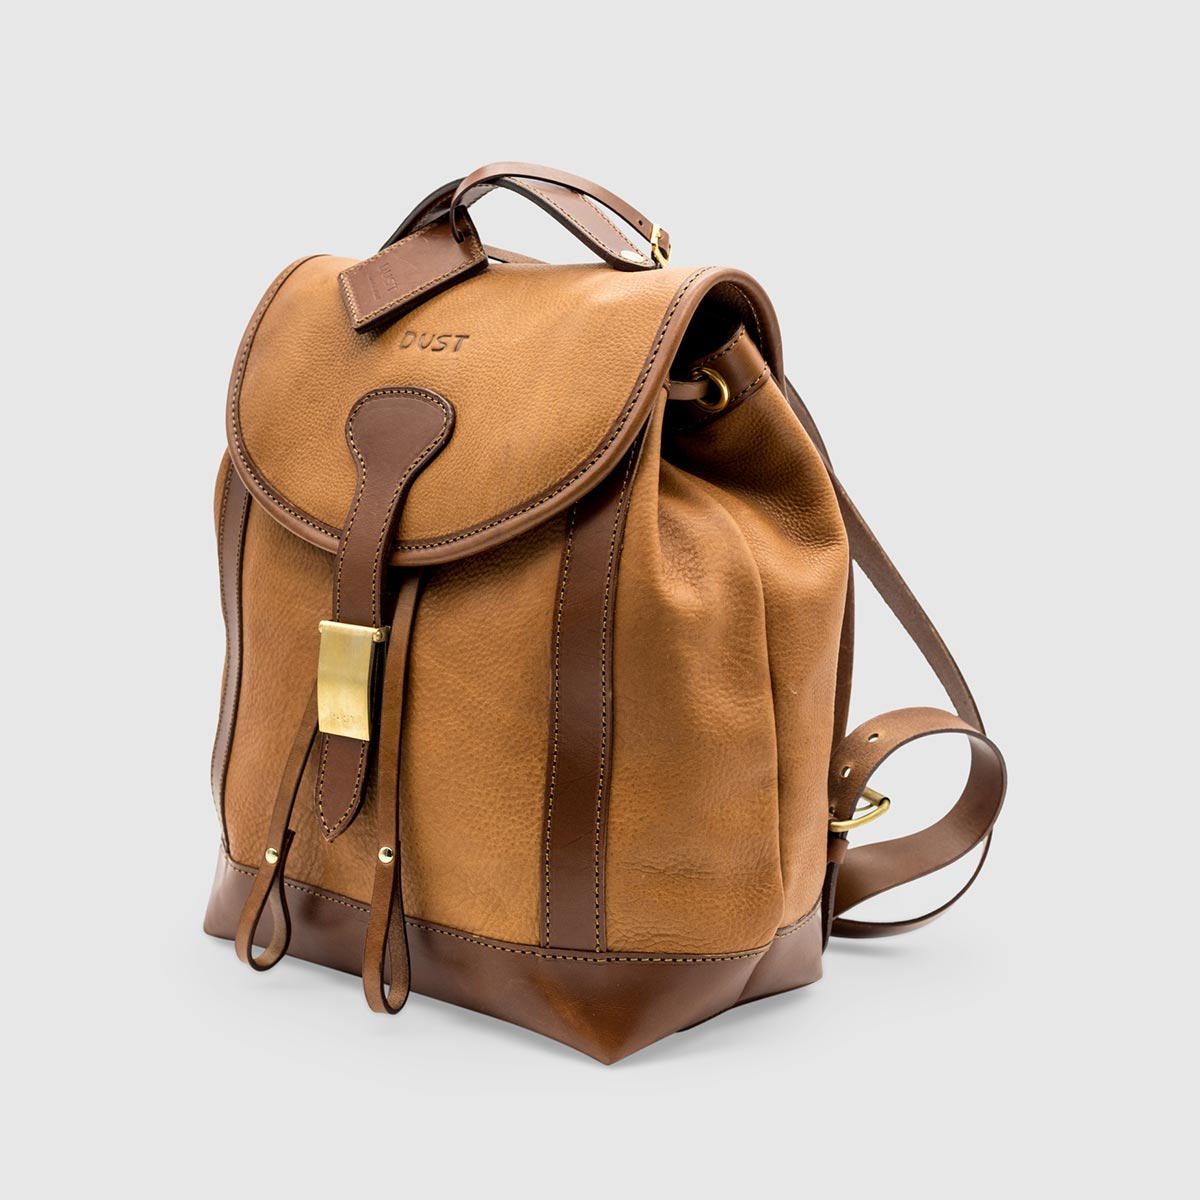 Vegetable Tumbled Leather Backpack  – Light Brown Leather The Dust on sale 2022 2